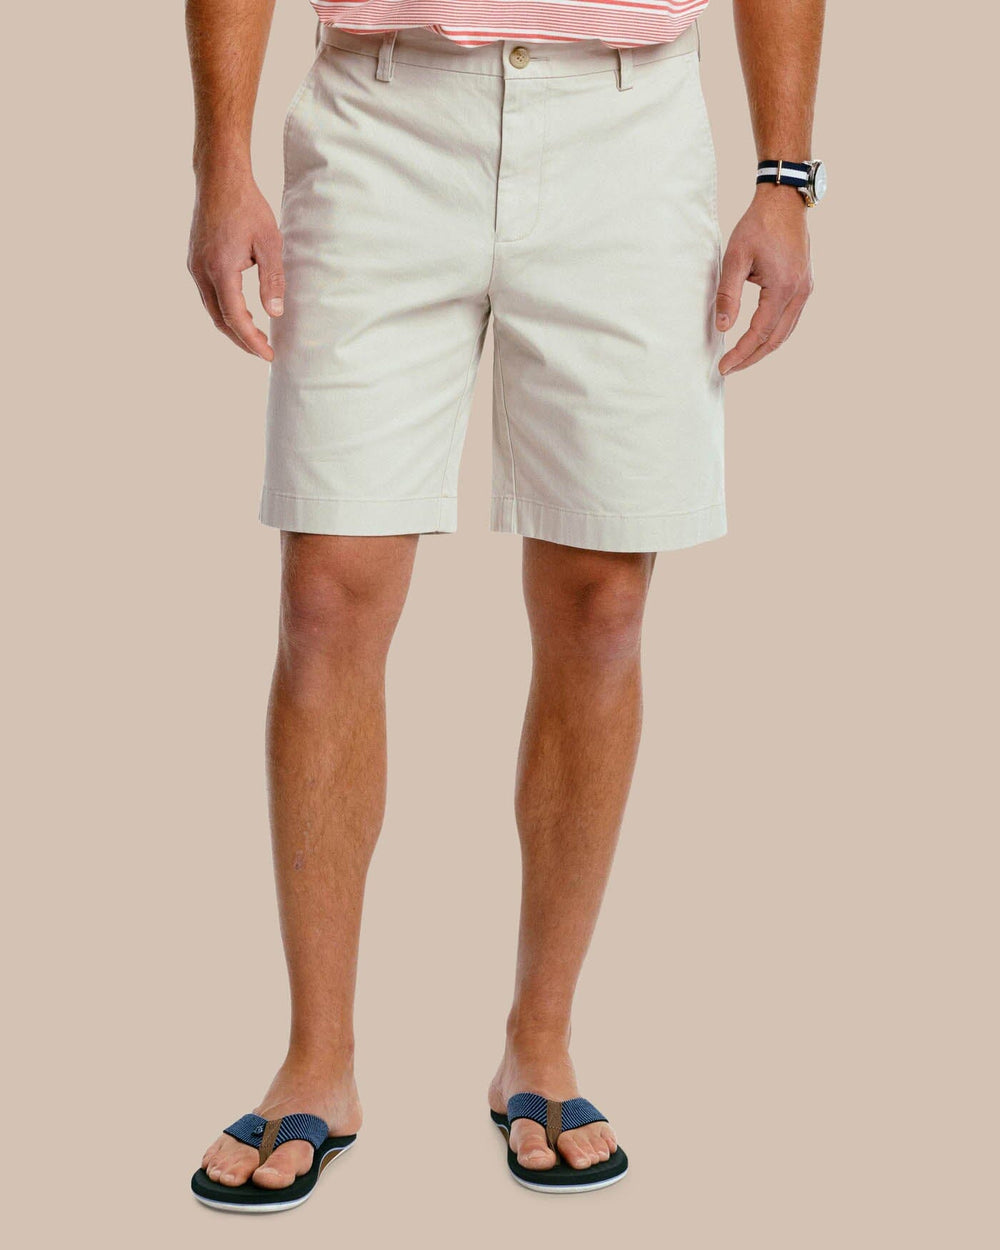 The front view of the Men's New Channel Marker 9 Inch Short by Southern Tide - Light Khaki